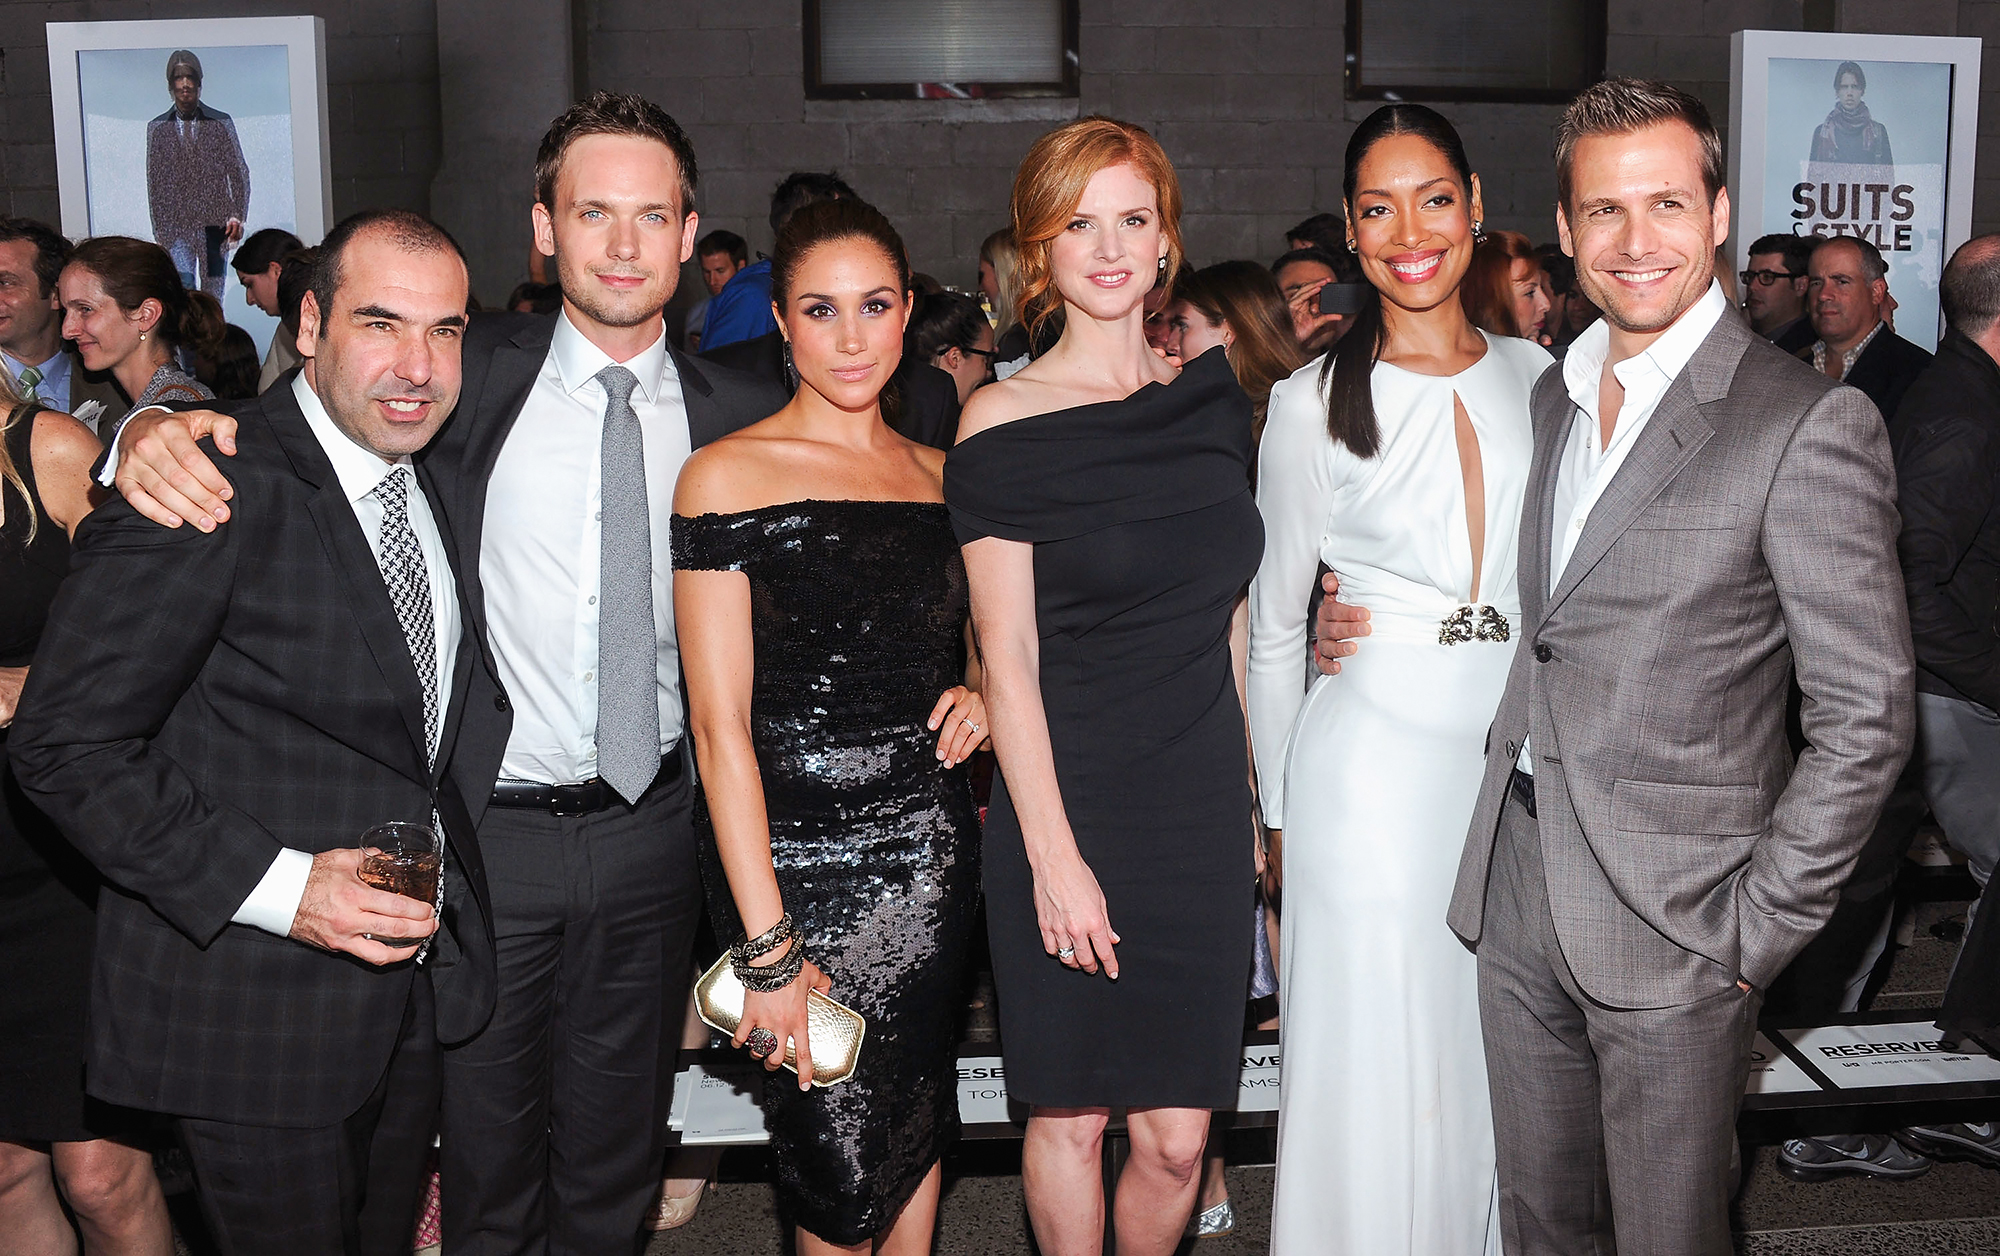 The 'Suits' Cast Sweetest Moments Together Over the Years